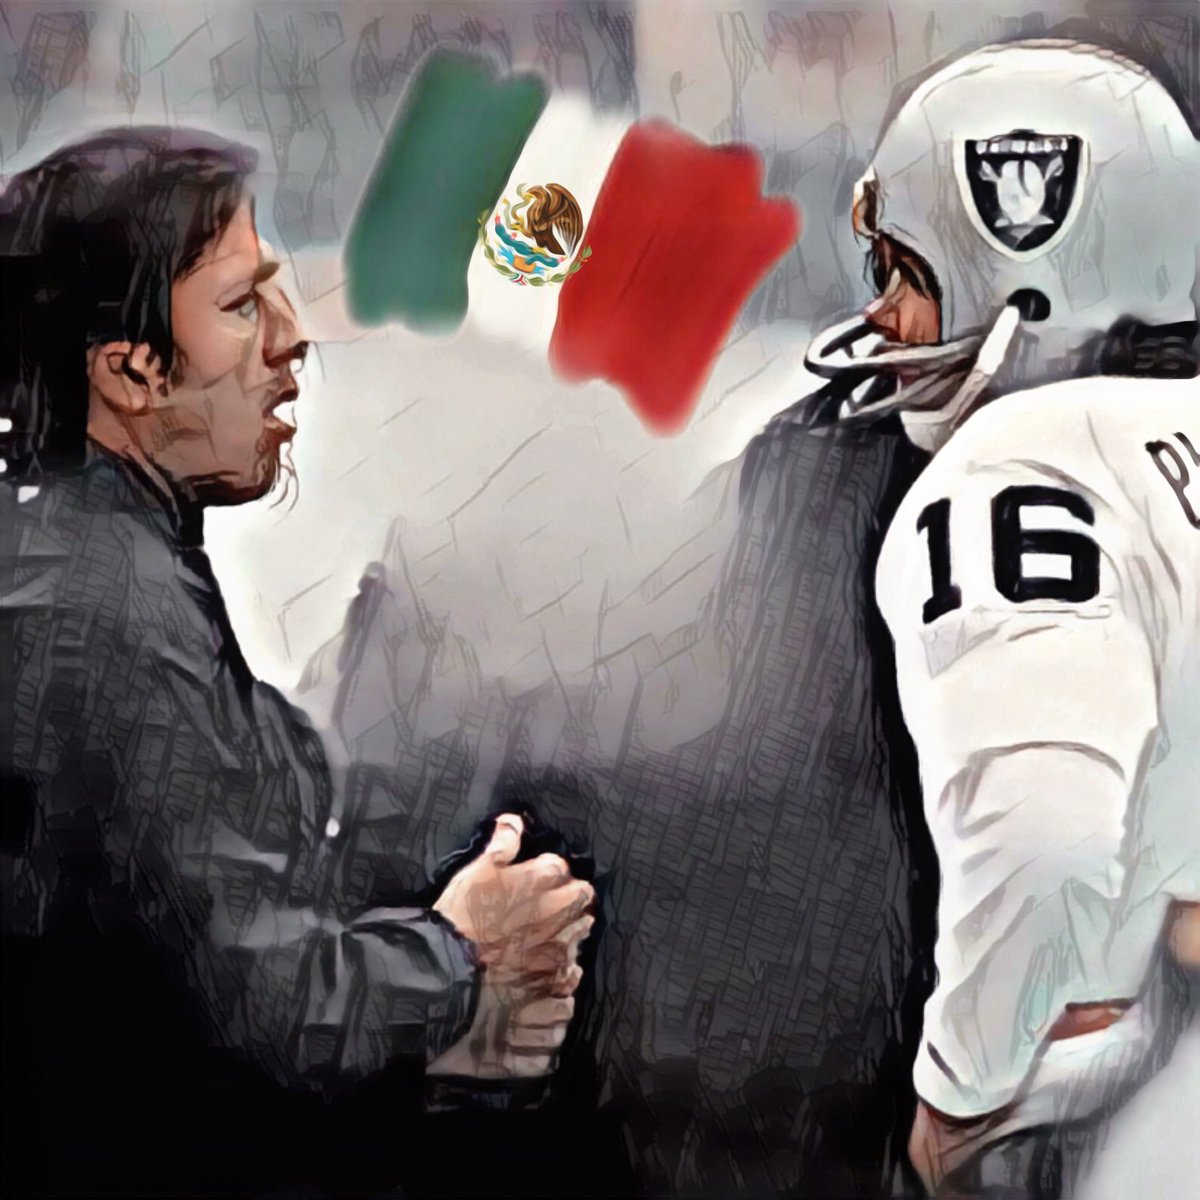 Happy Plunkett Saturday be blessed and make someone's day! Never stop sharing Jim let's get him in the hall! #RaiderNation #JimPlunkett4PFHOF2025 #Raiders